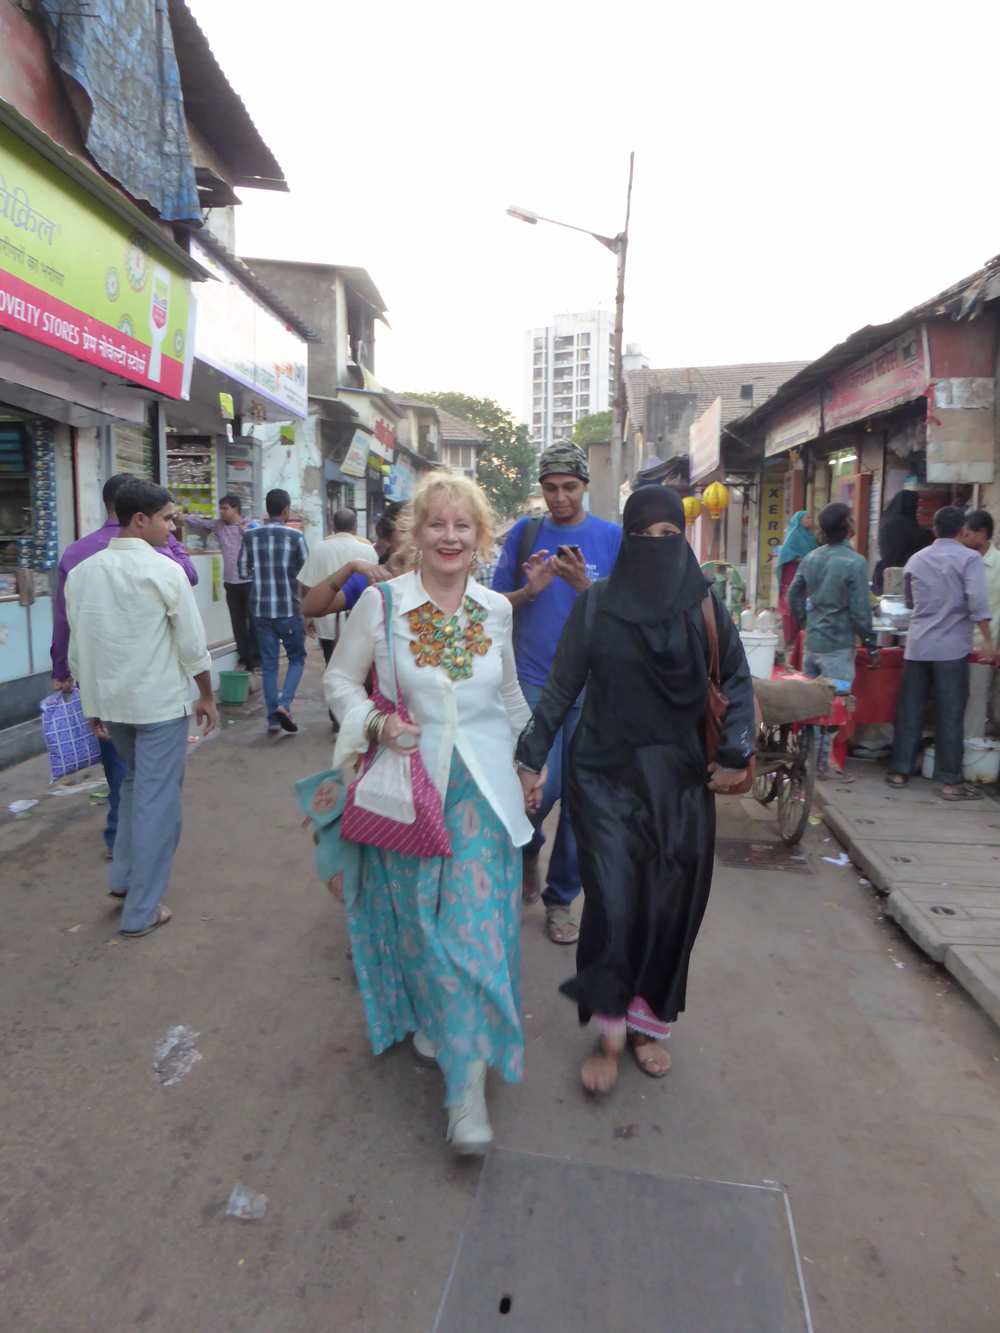 Walking to the opening with Bano, the transgender and Tehseen